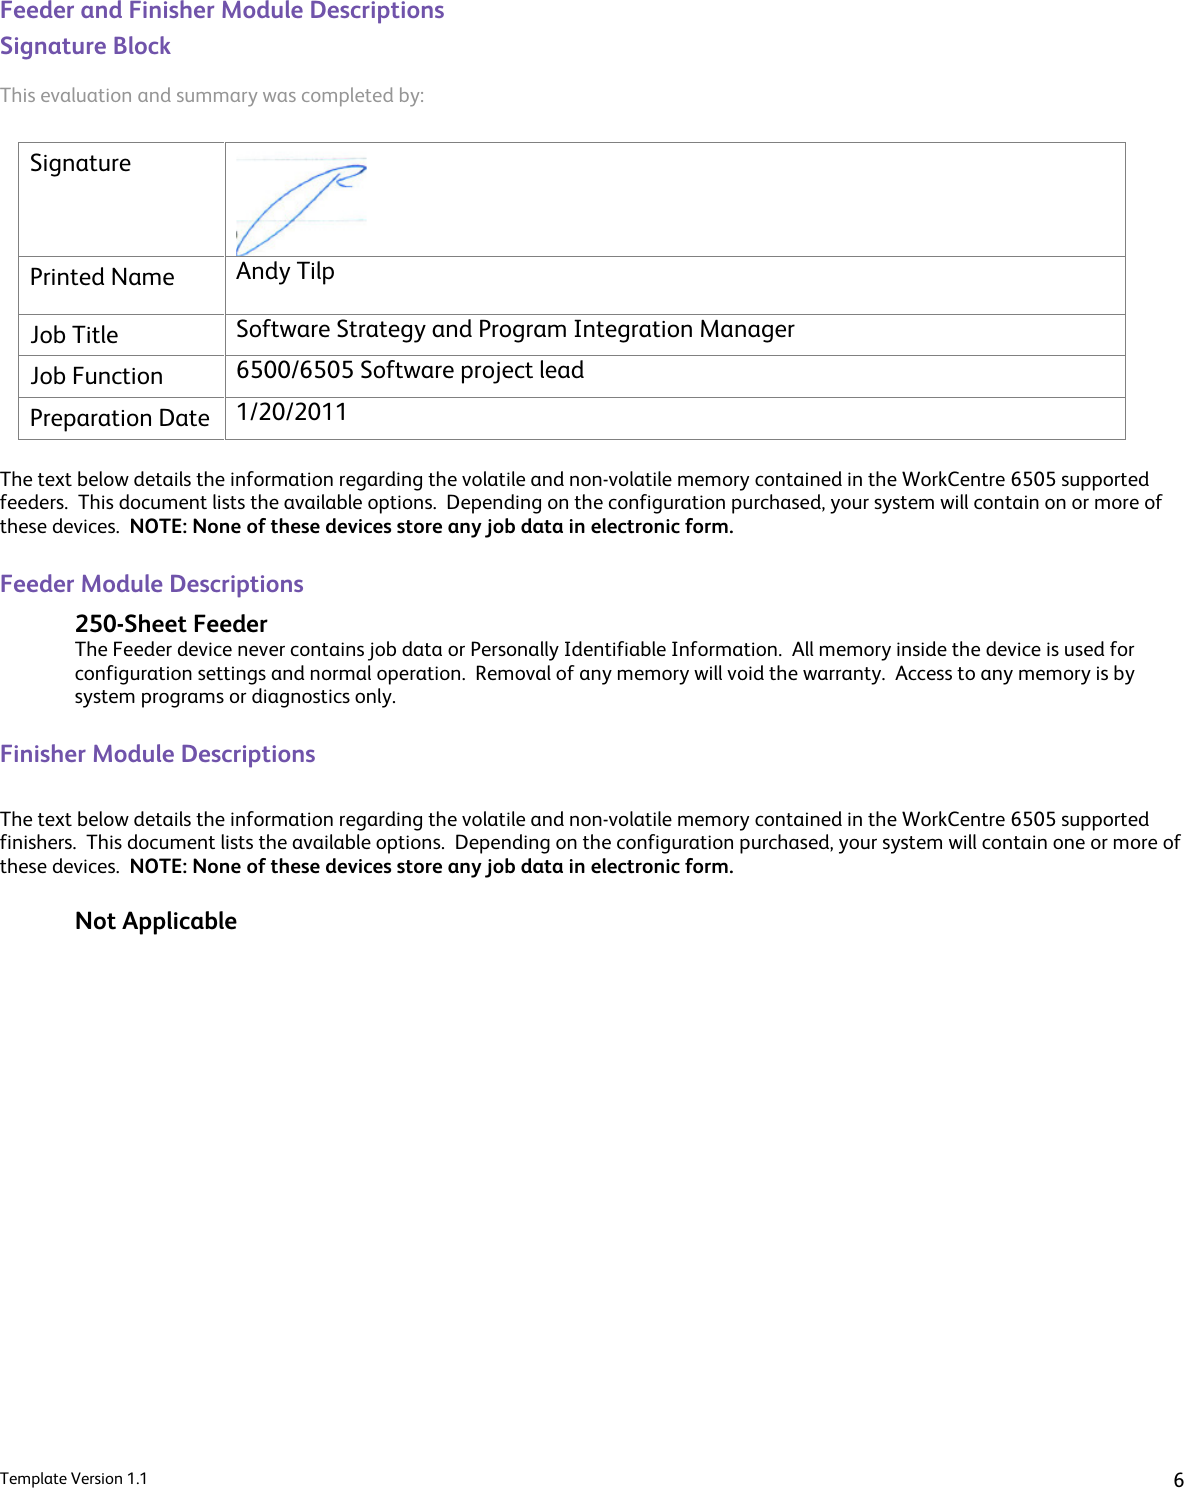 Page 6 of 6 - Xerox Xerox-Workcentre-6505-Users-Manual WorkCentre_6505_Statement_Of_Volatility